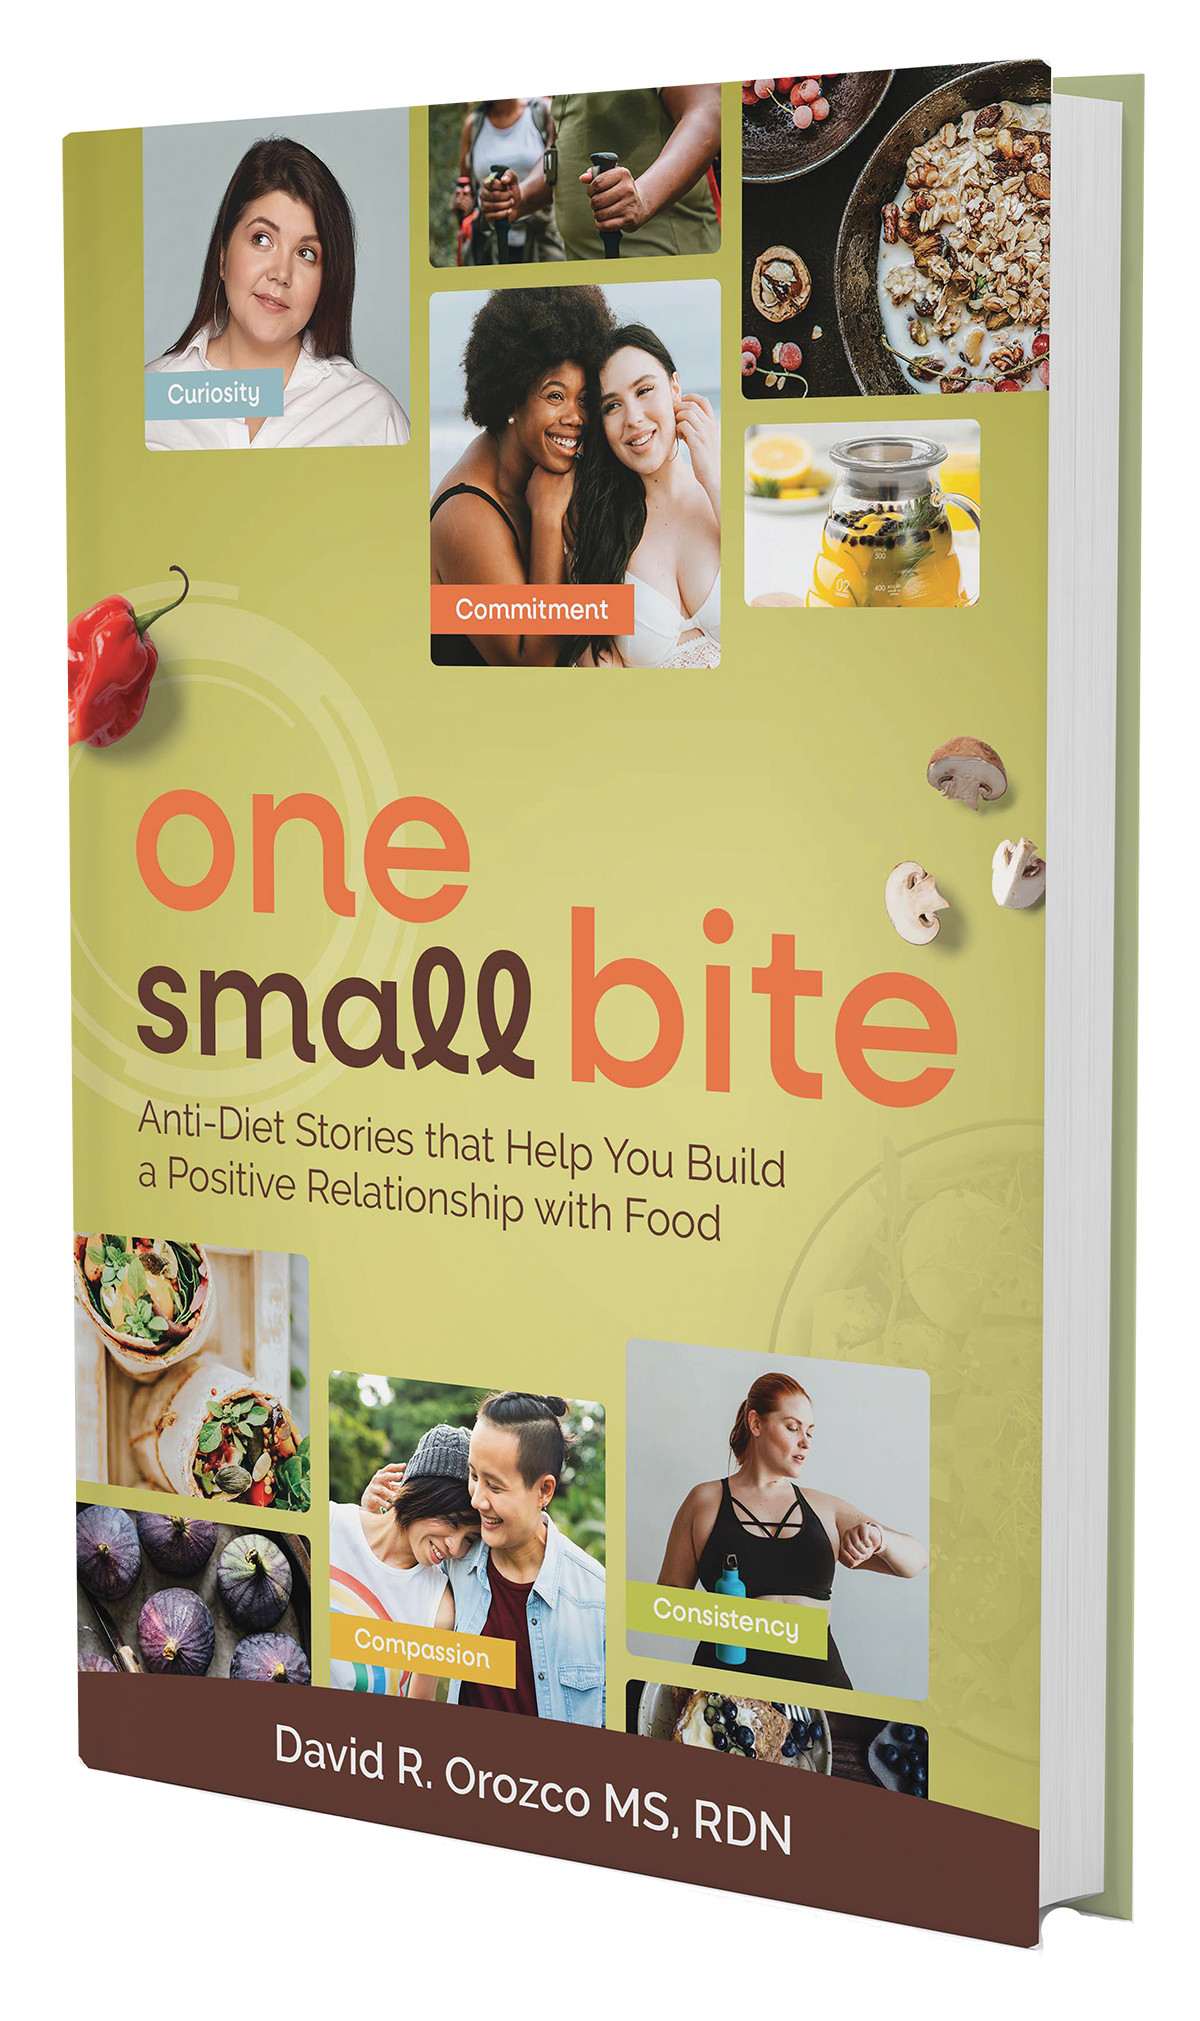 One Small Bit - a new book by David Orozco, MS, RDN